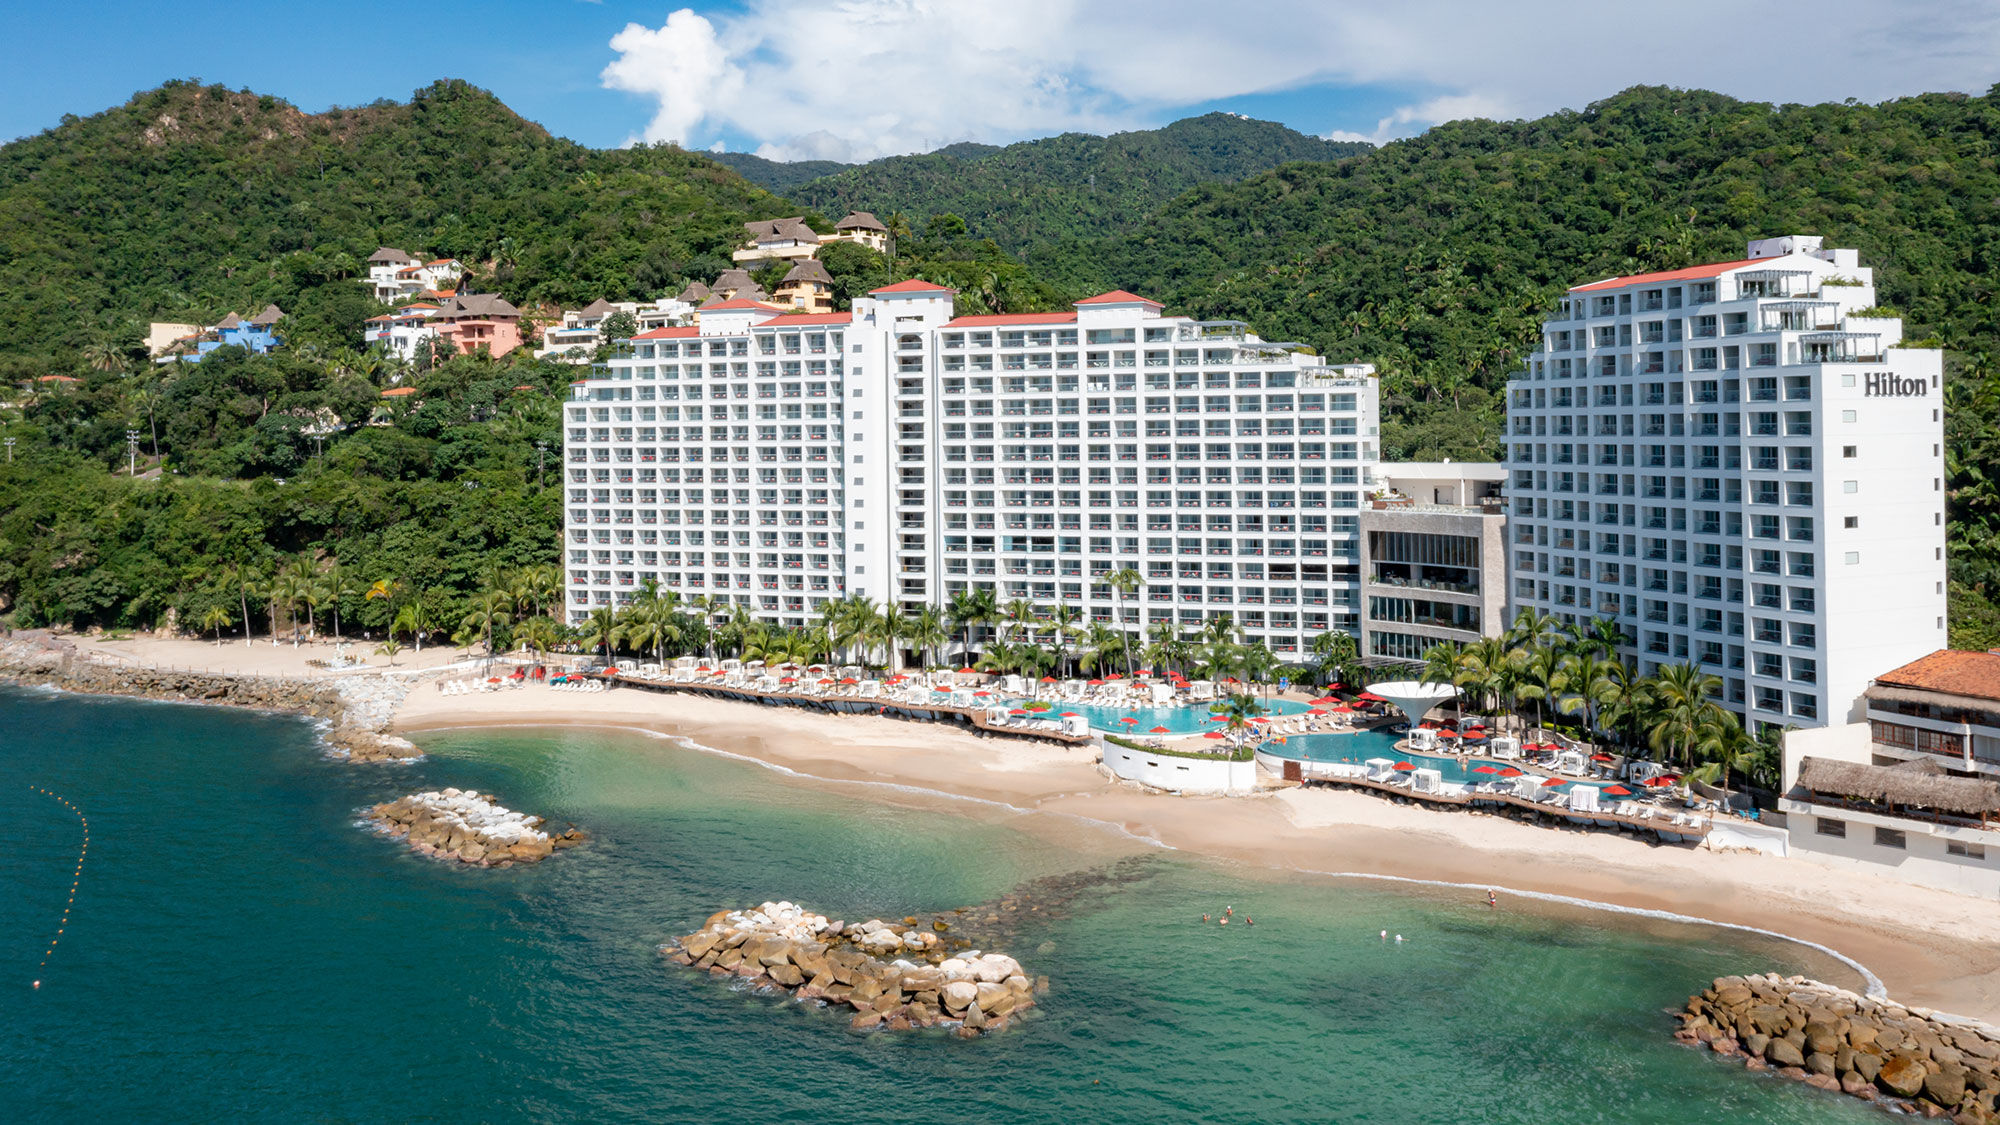 The going is good at the new Hilton Vallarta Riviera